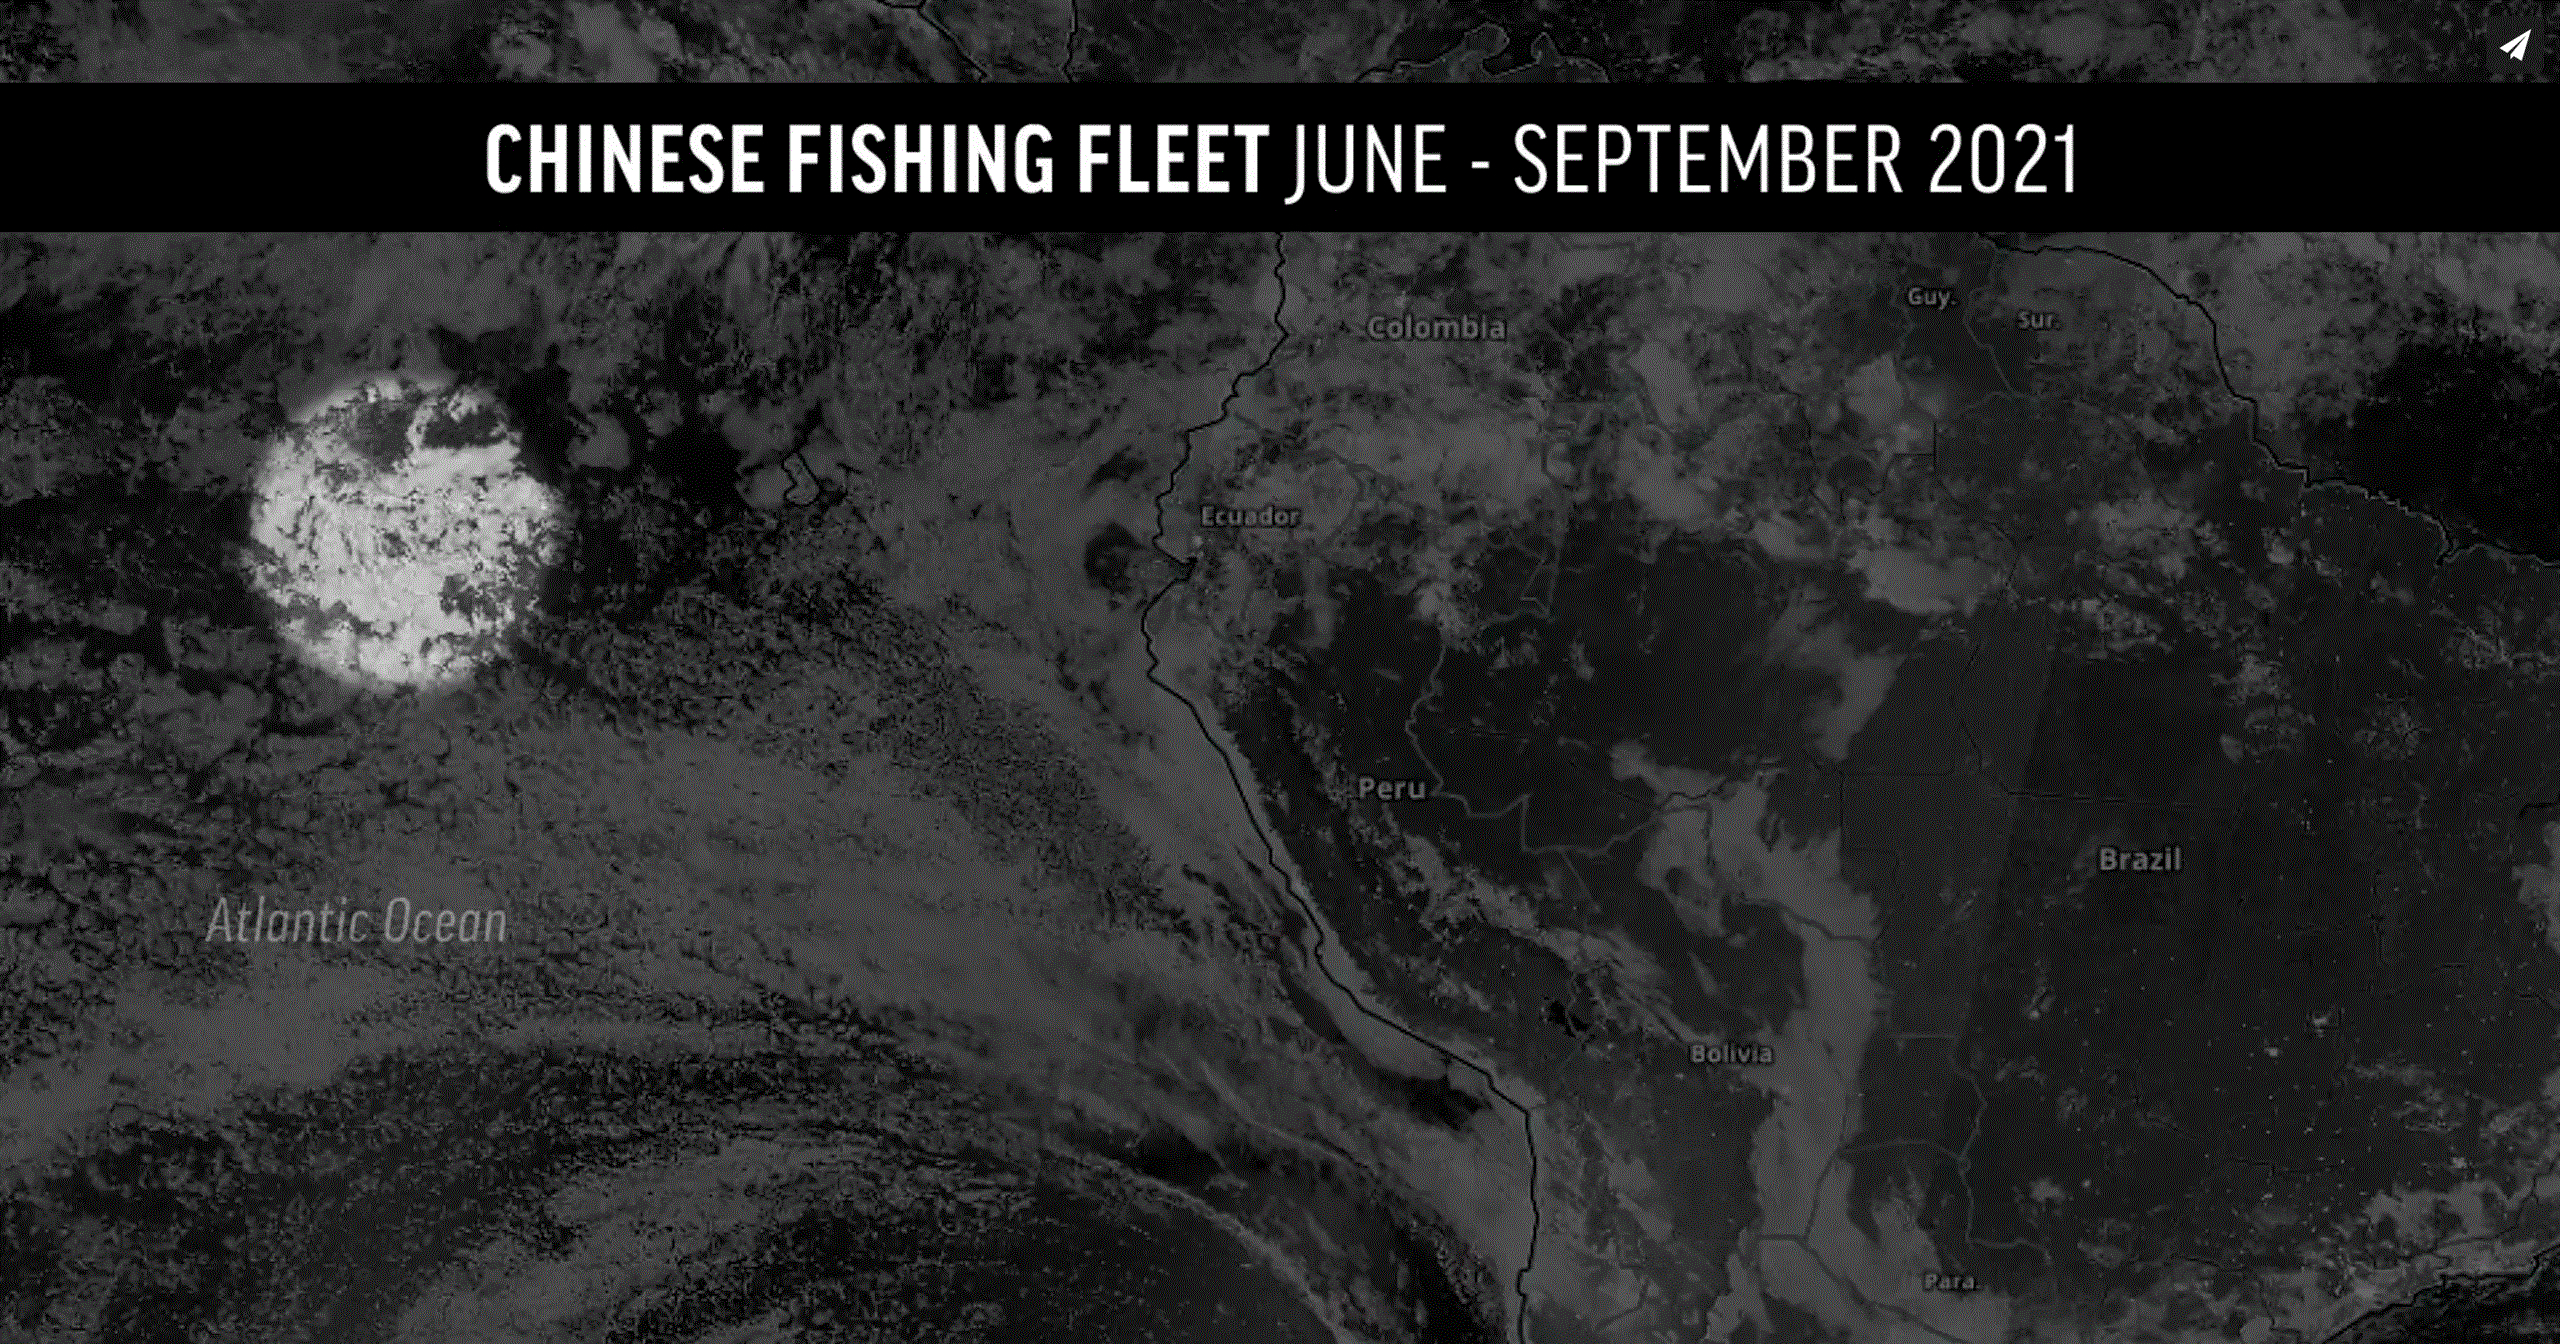 Satellite view of the Chinese fishing fleet crossing the Pacific ocean to the coast of Peru, June - September 2021. Data: NASA. Video: AP News